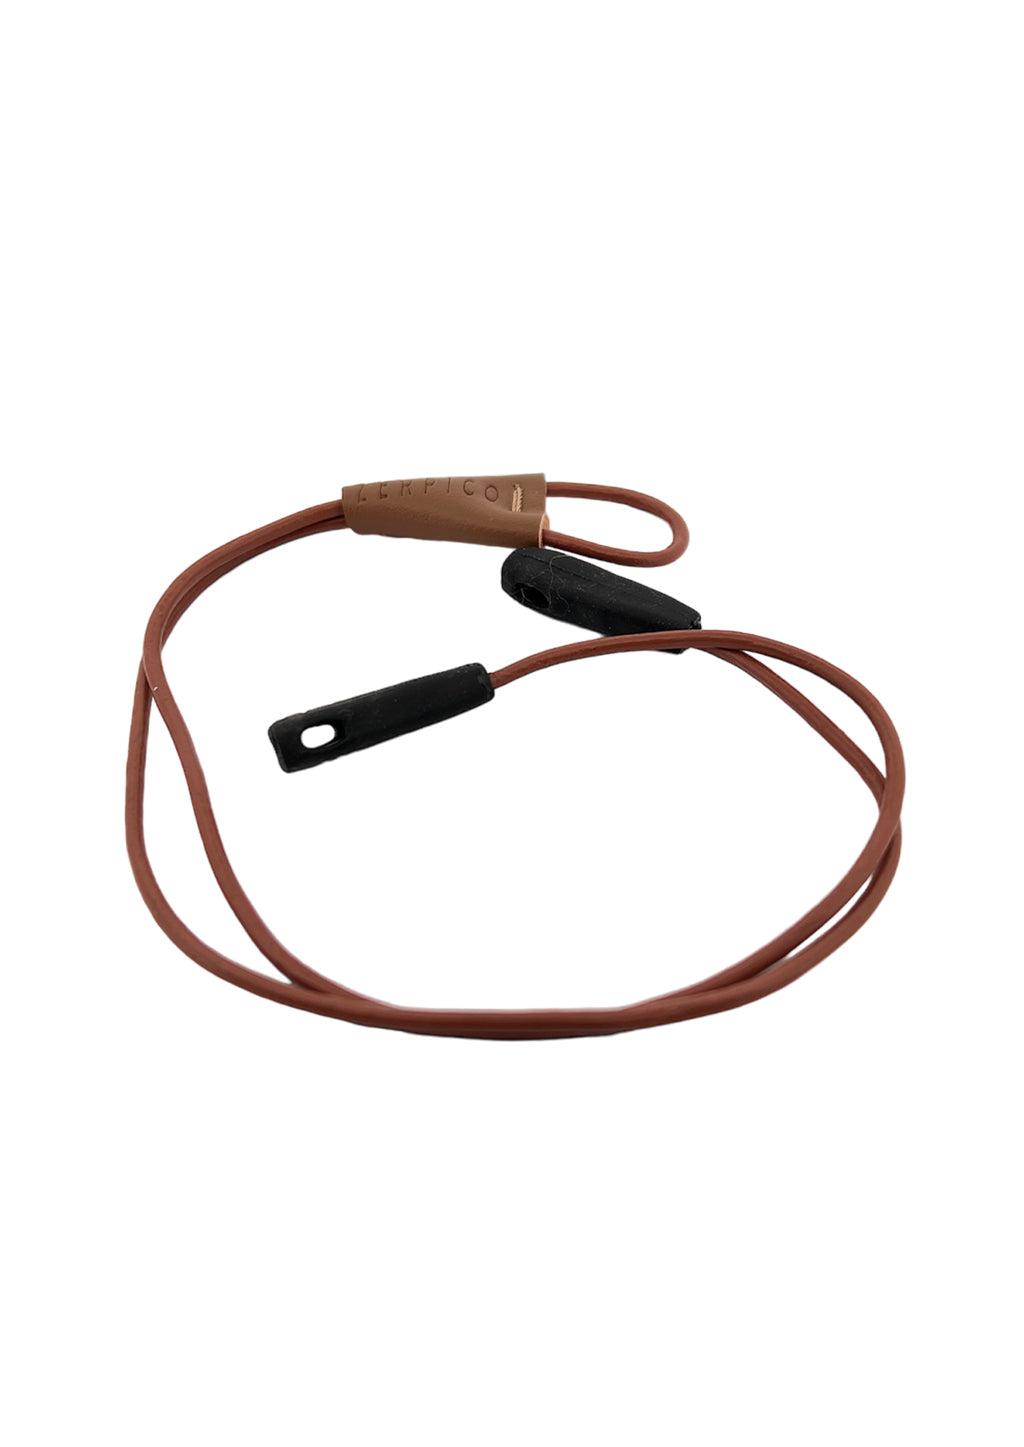 Vegan Leather Safety Strap - 2 colors-5